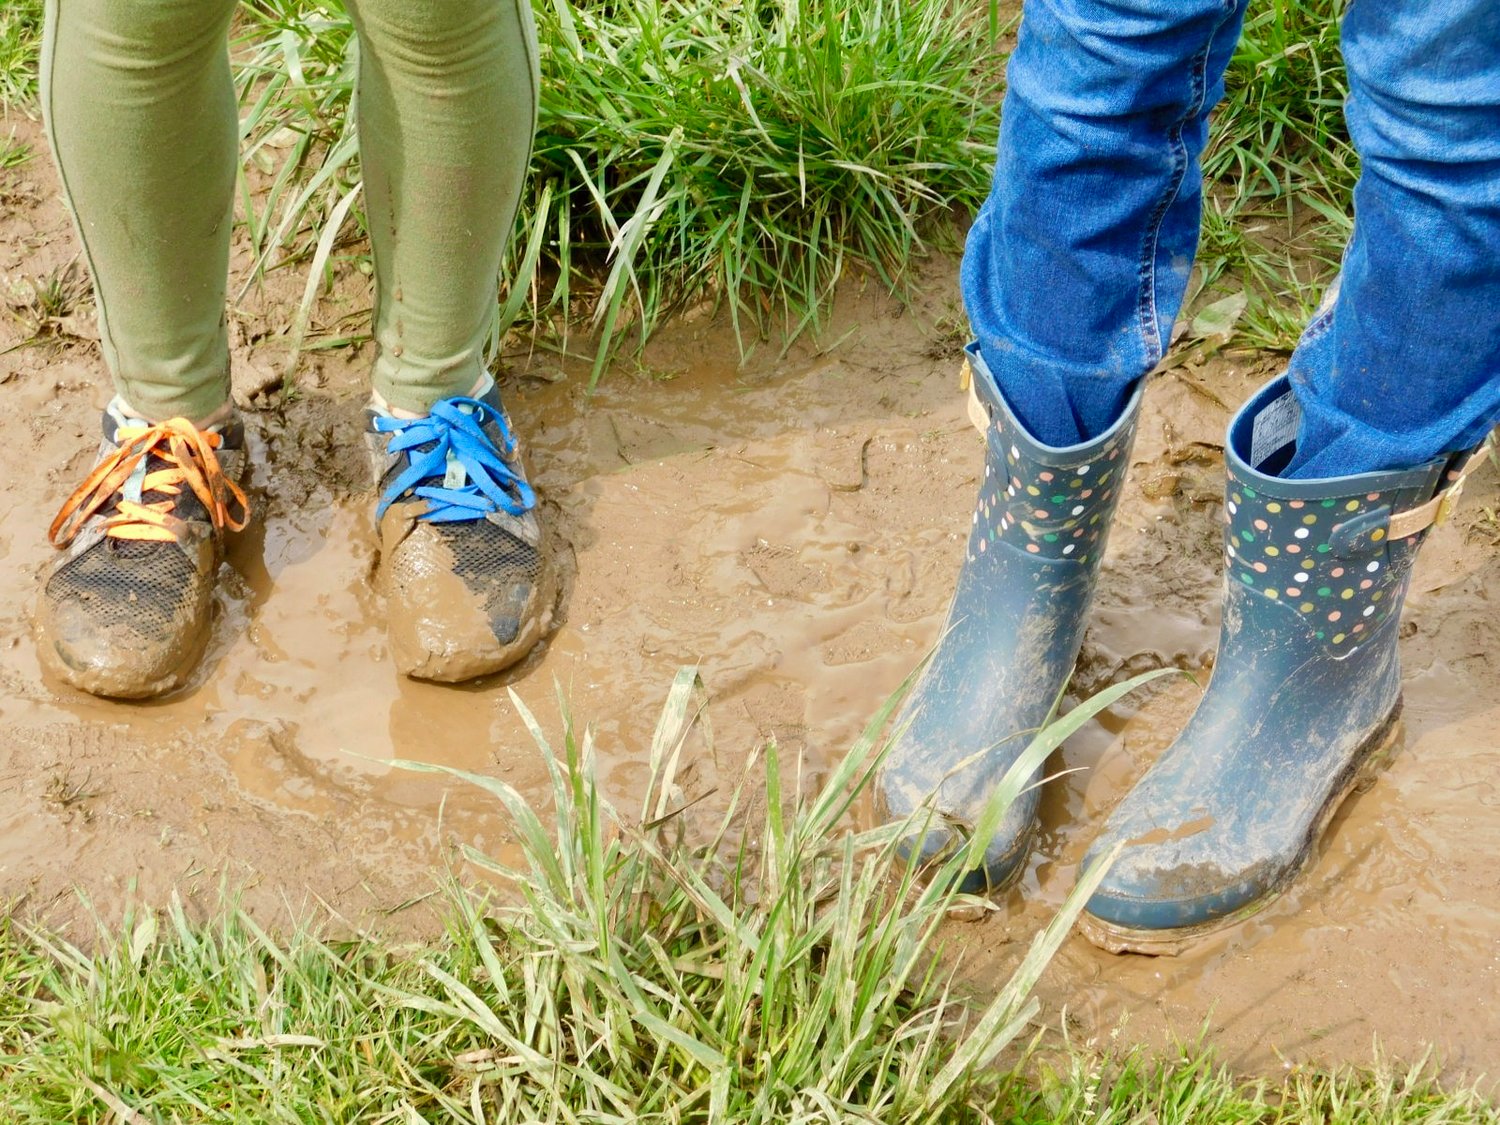 Two kids with muddy shoes are pictured at the Mini-Cispus program at Whipple Creek Regional Park.